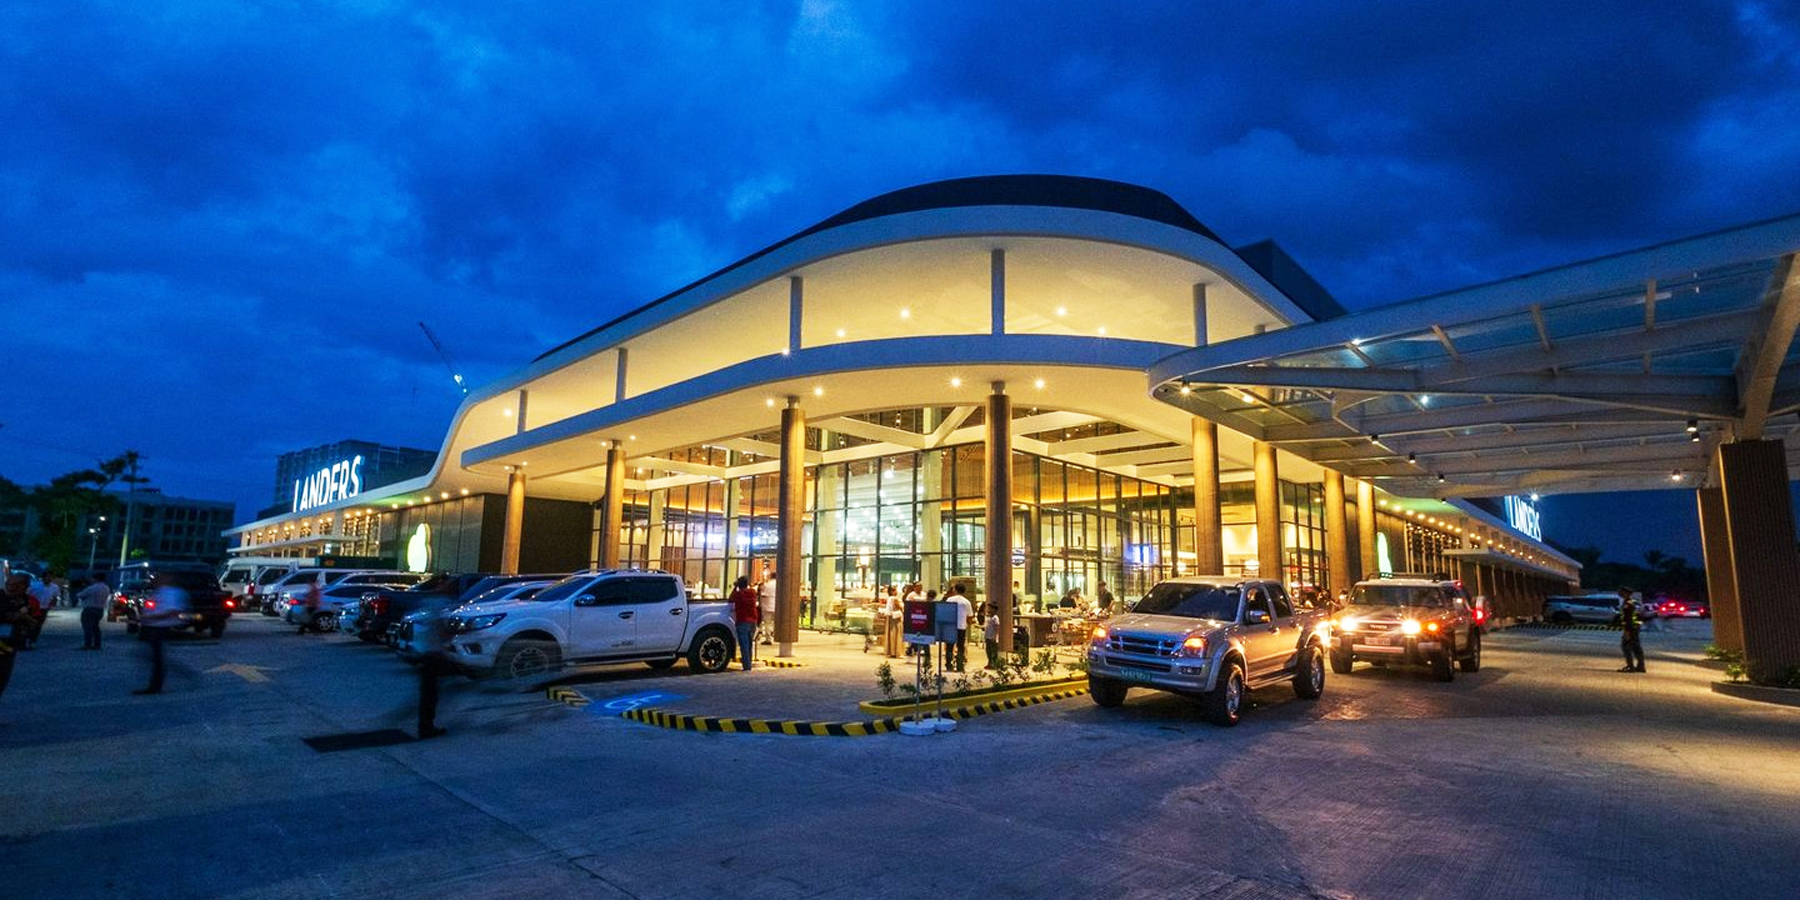 Landers Bacolod Shopping Tips: Maximize Your Visit